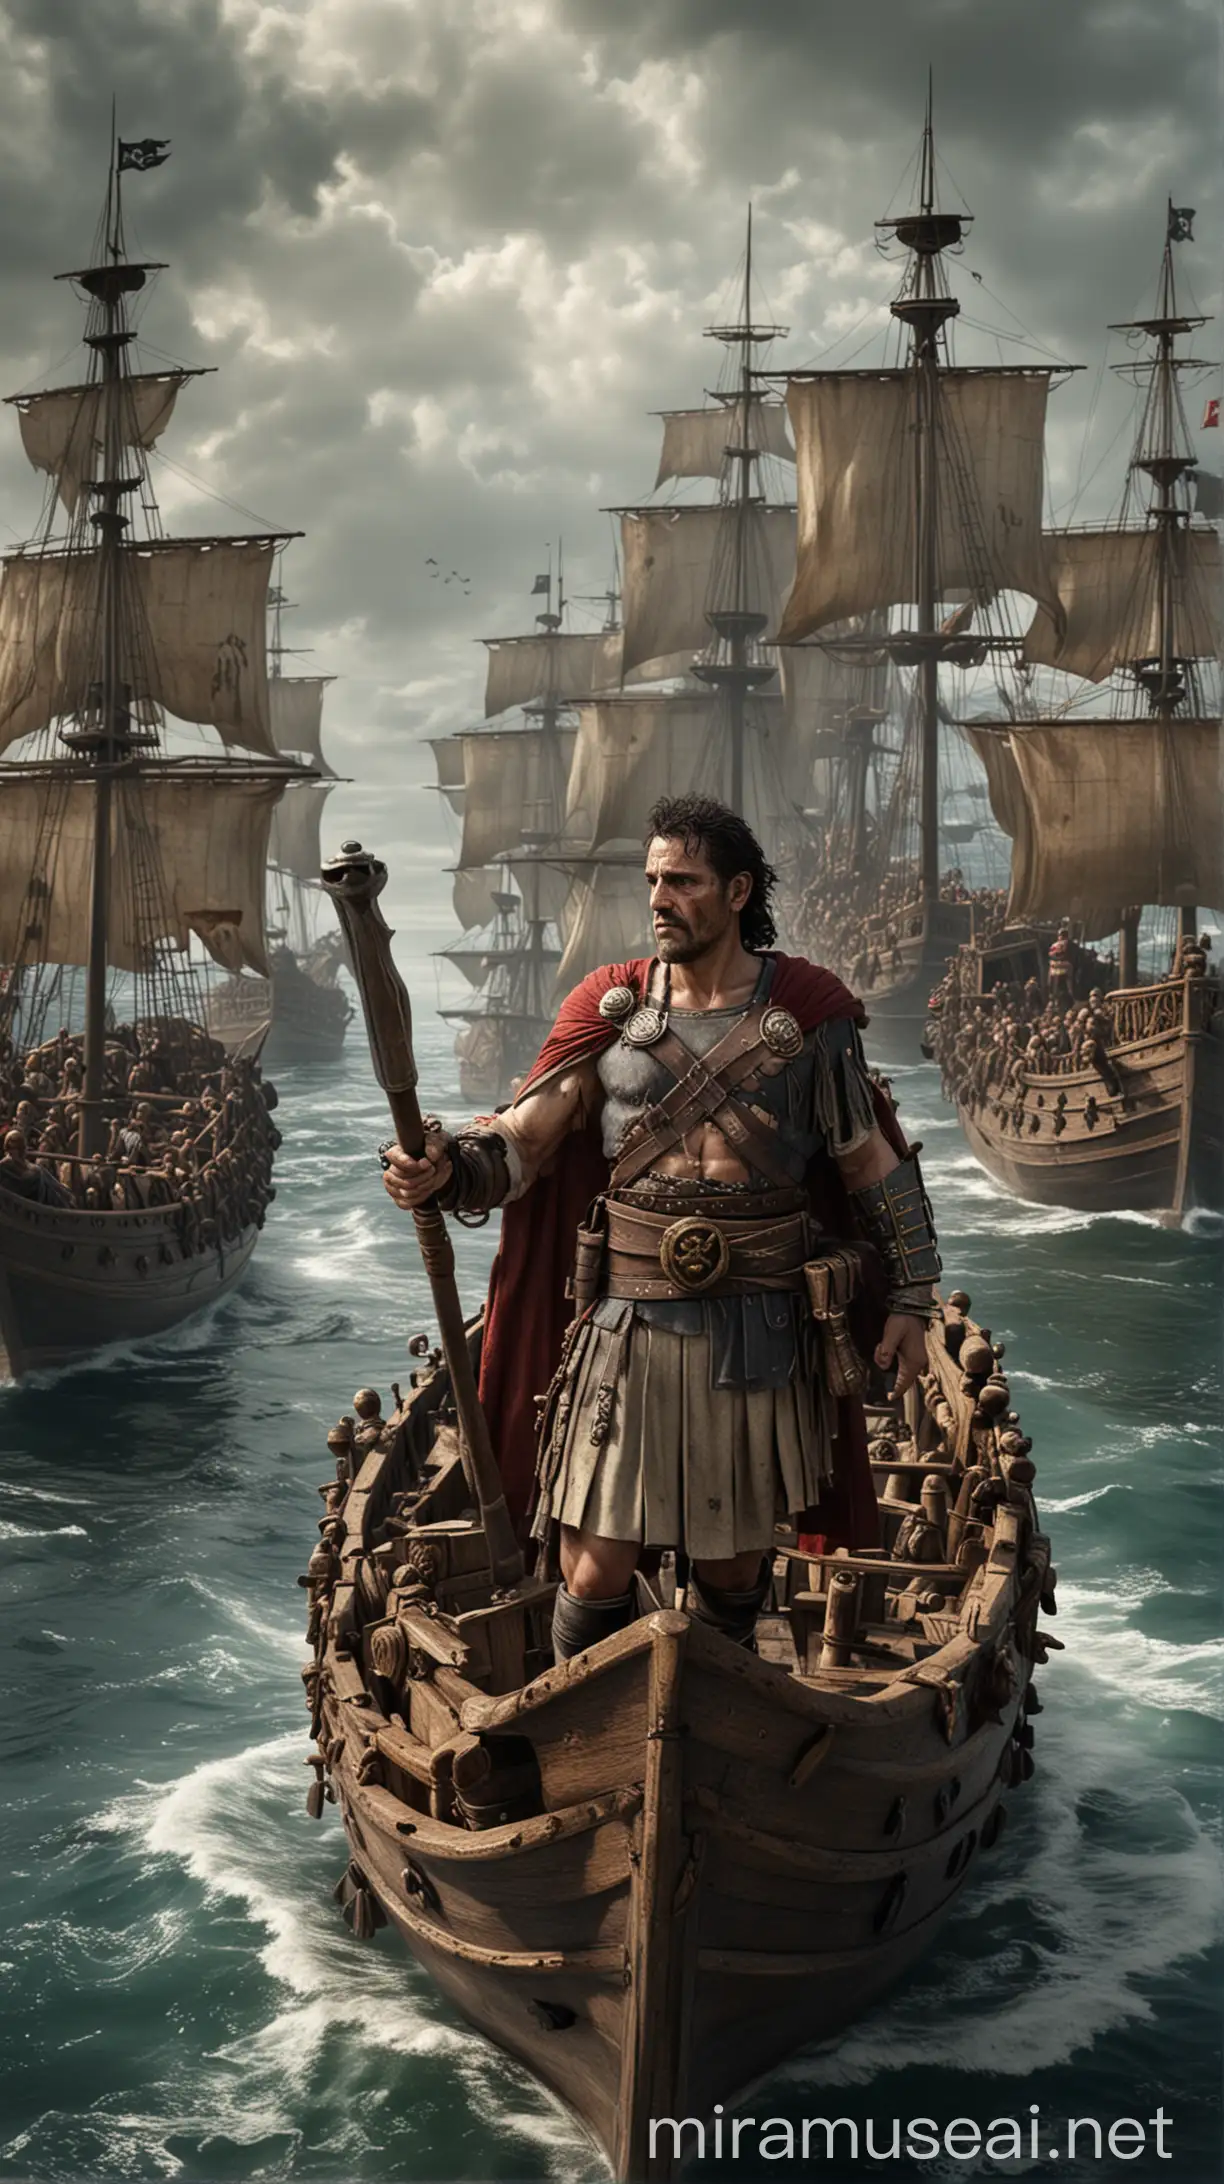 Caesar Leading Fleet of Ships to Pirates Stronghold in Hyper Realistic Scene